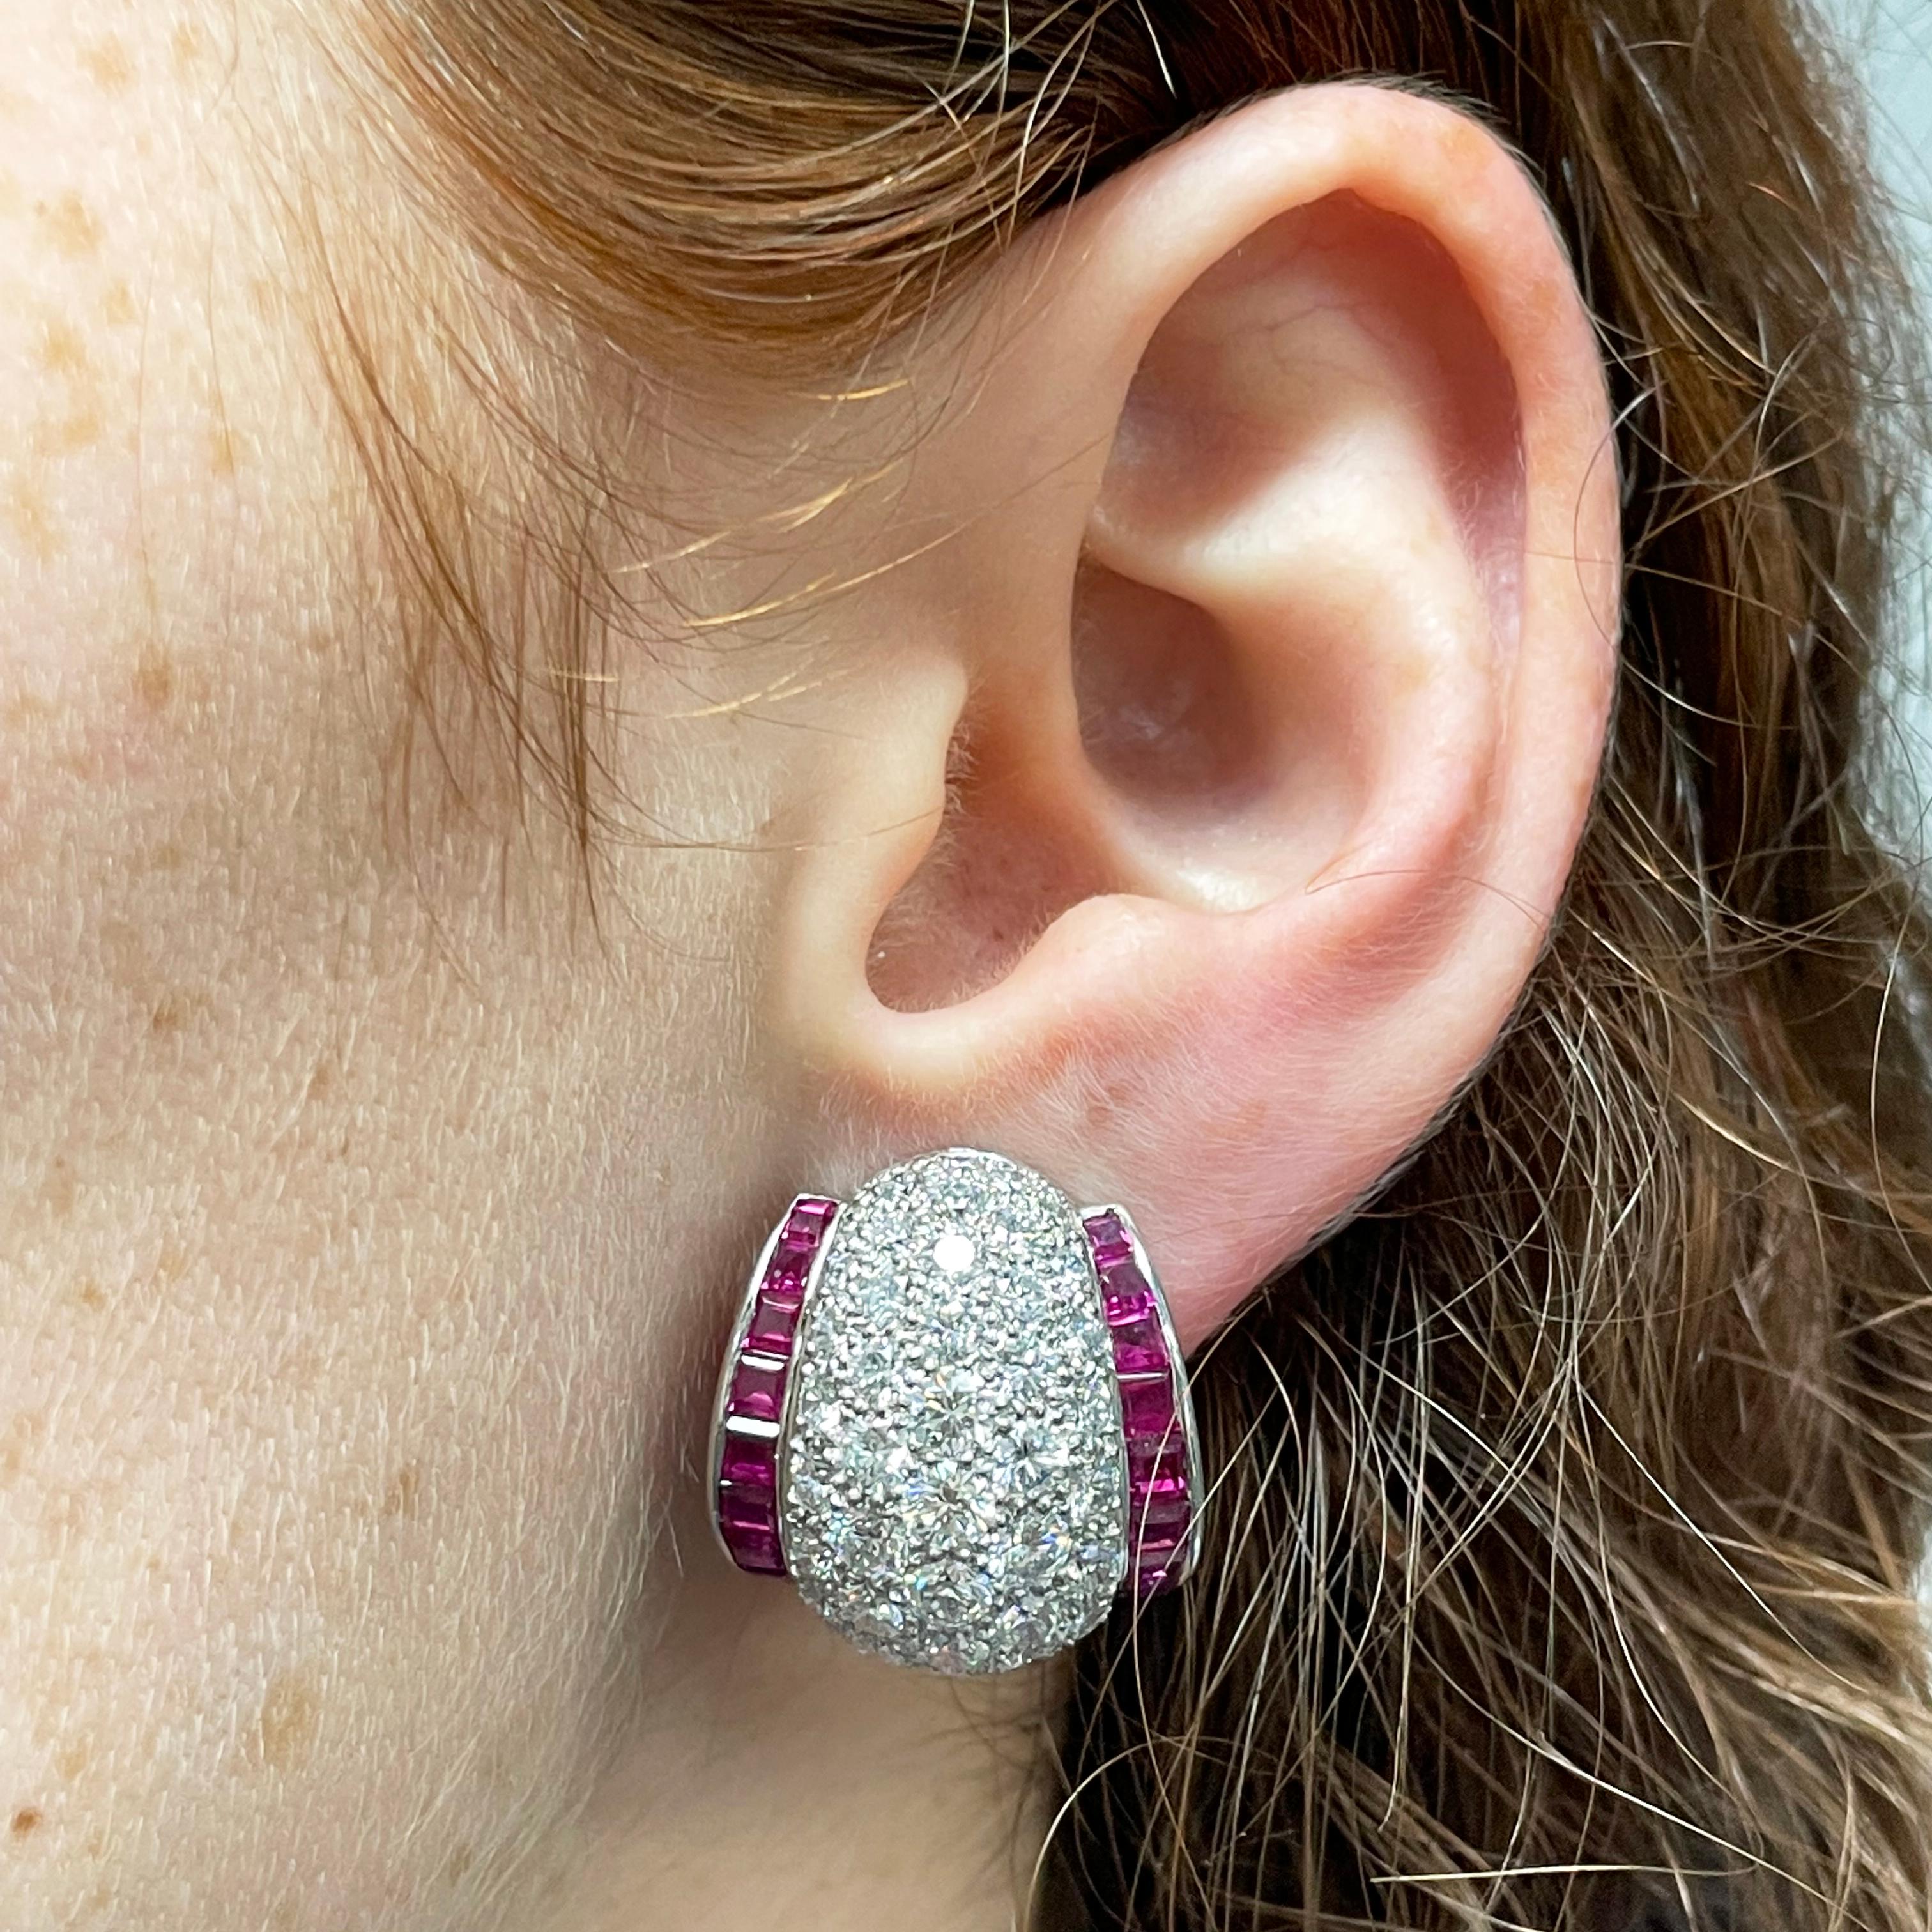 Oscar Heyman platinum 'shrimp' earrings contain 96 round diamonds weighing 7.93tcw (F-G/VS quality) and 52 square calibre rubies weighing 4.81tcw. The face of the earrings measures 22mm tall by 20mm wide. They are stamped with the makers mark, PLAT,